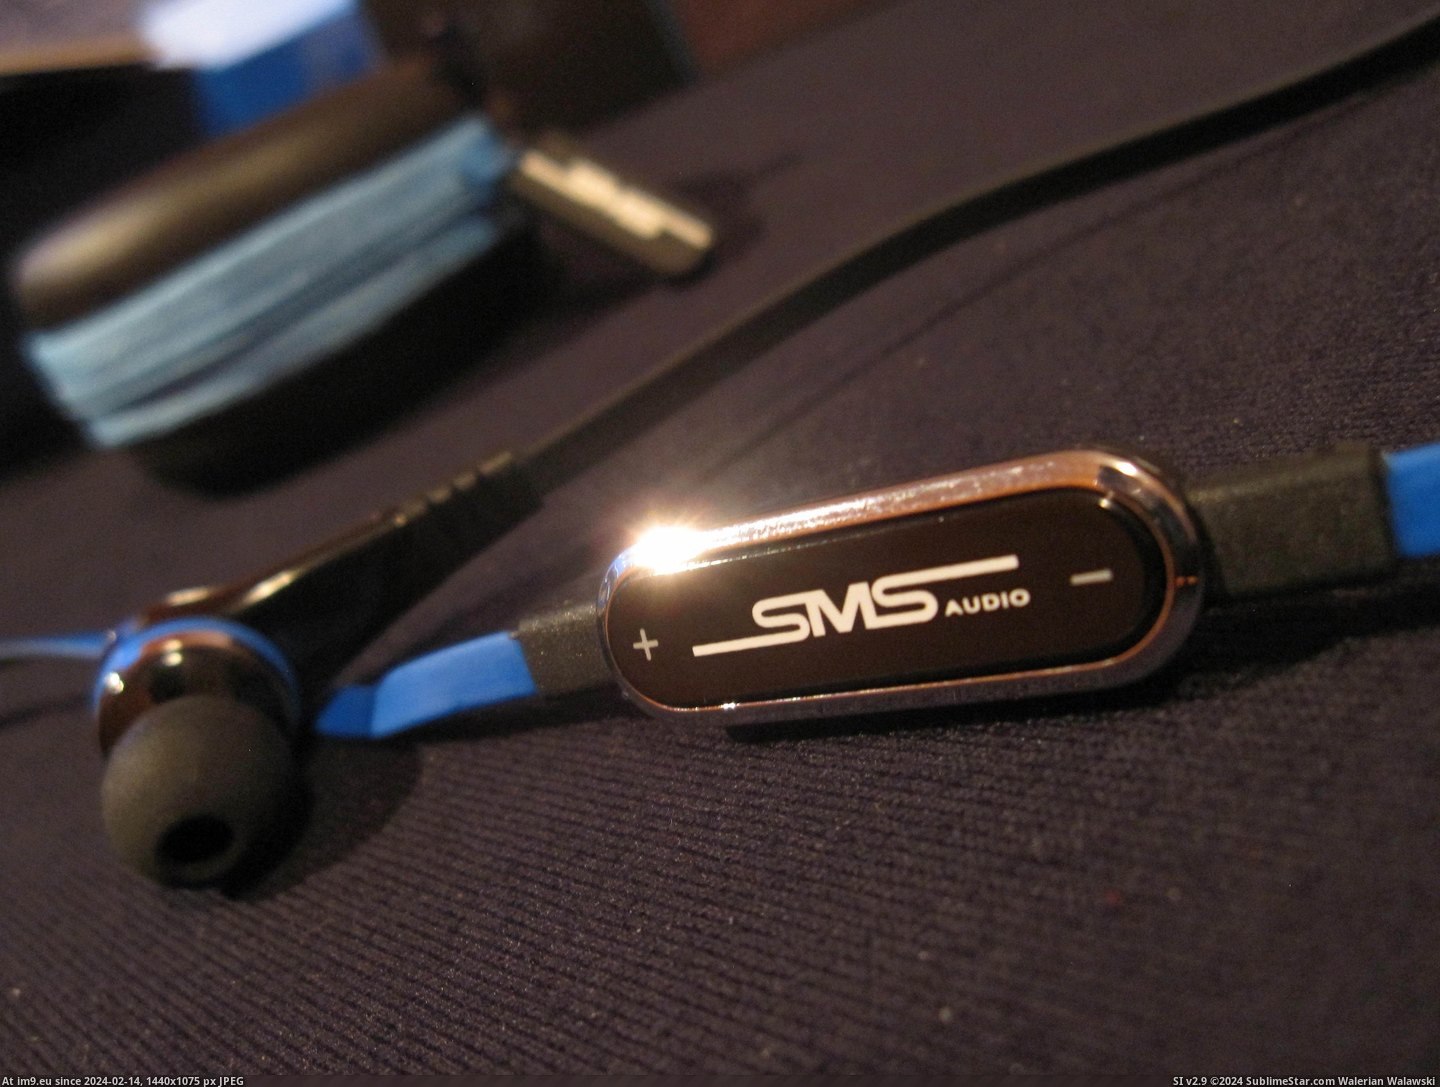  #Sms  IMG_1348 Pic. (Image of album SMS Audio Street))